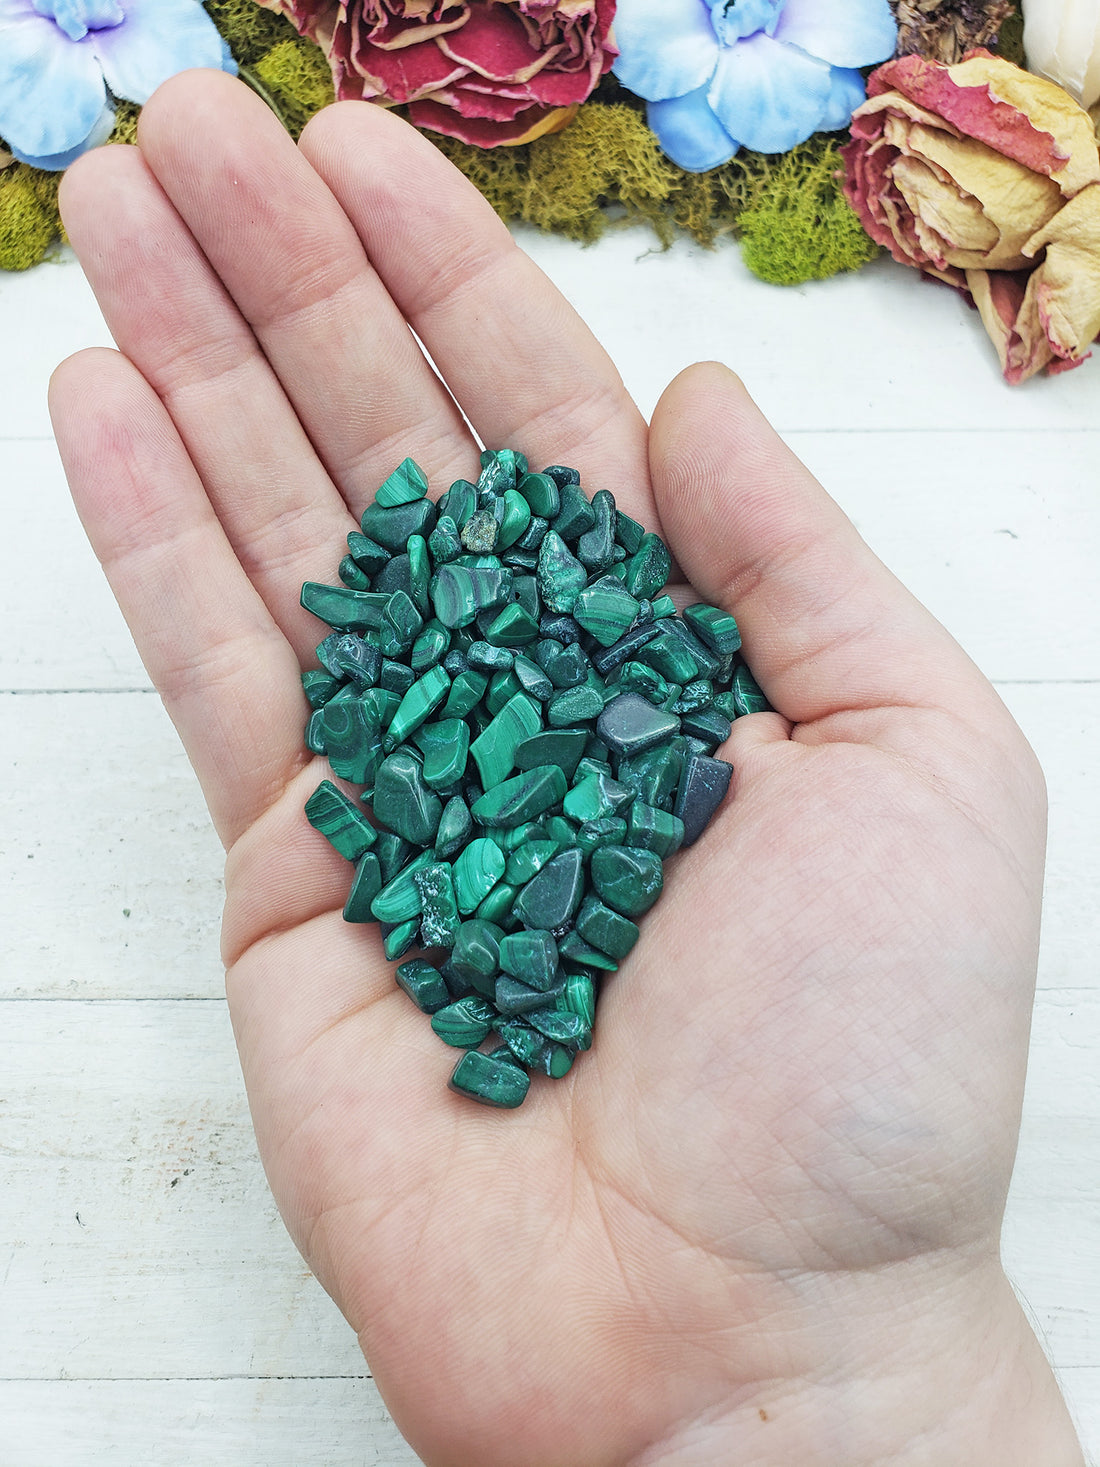 malachite crystal chips in hand